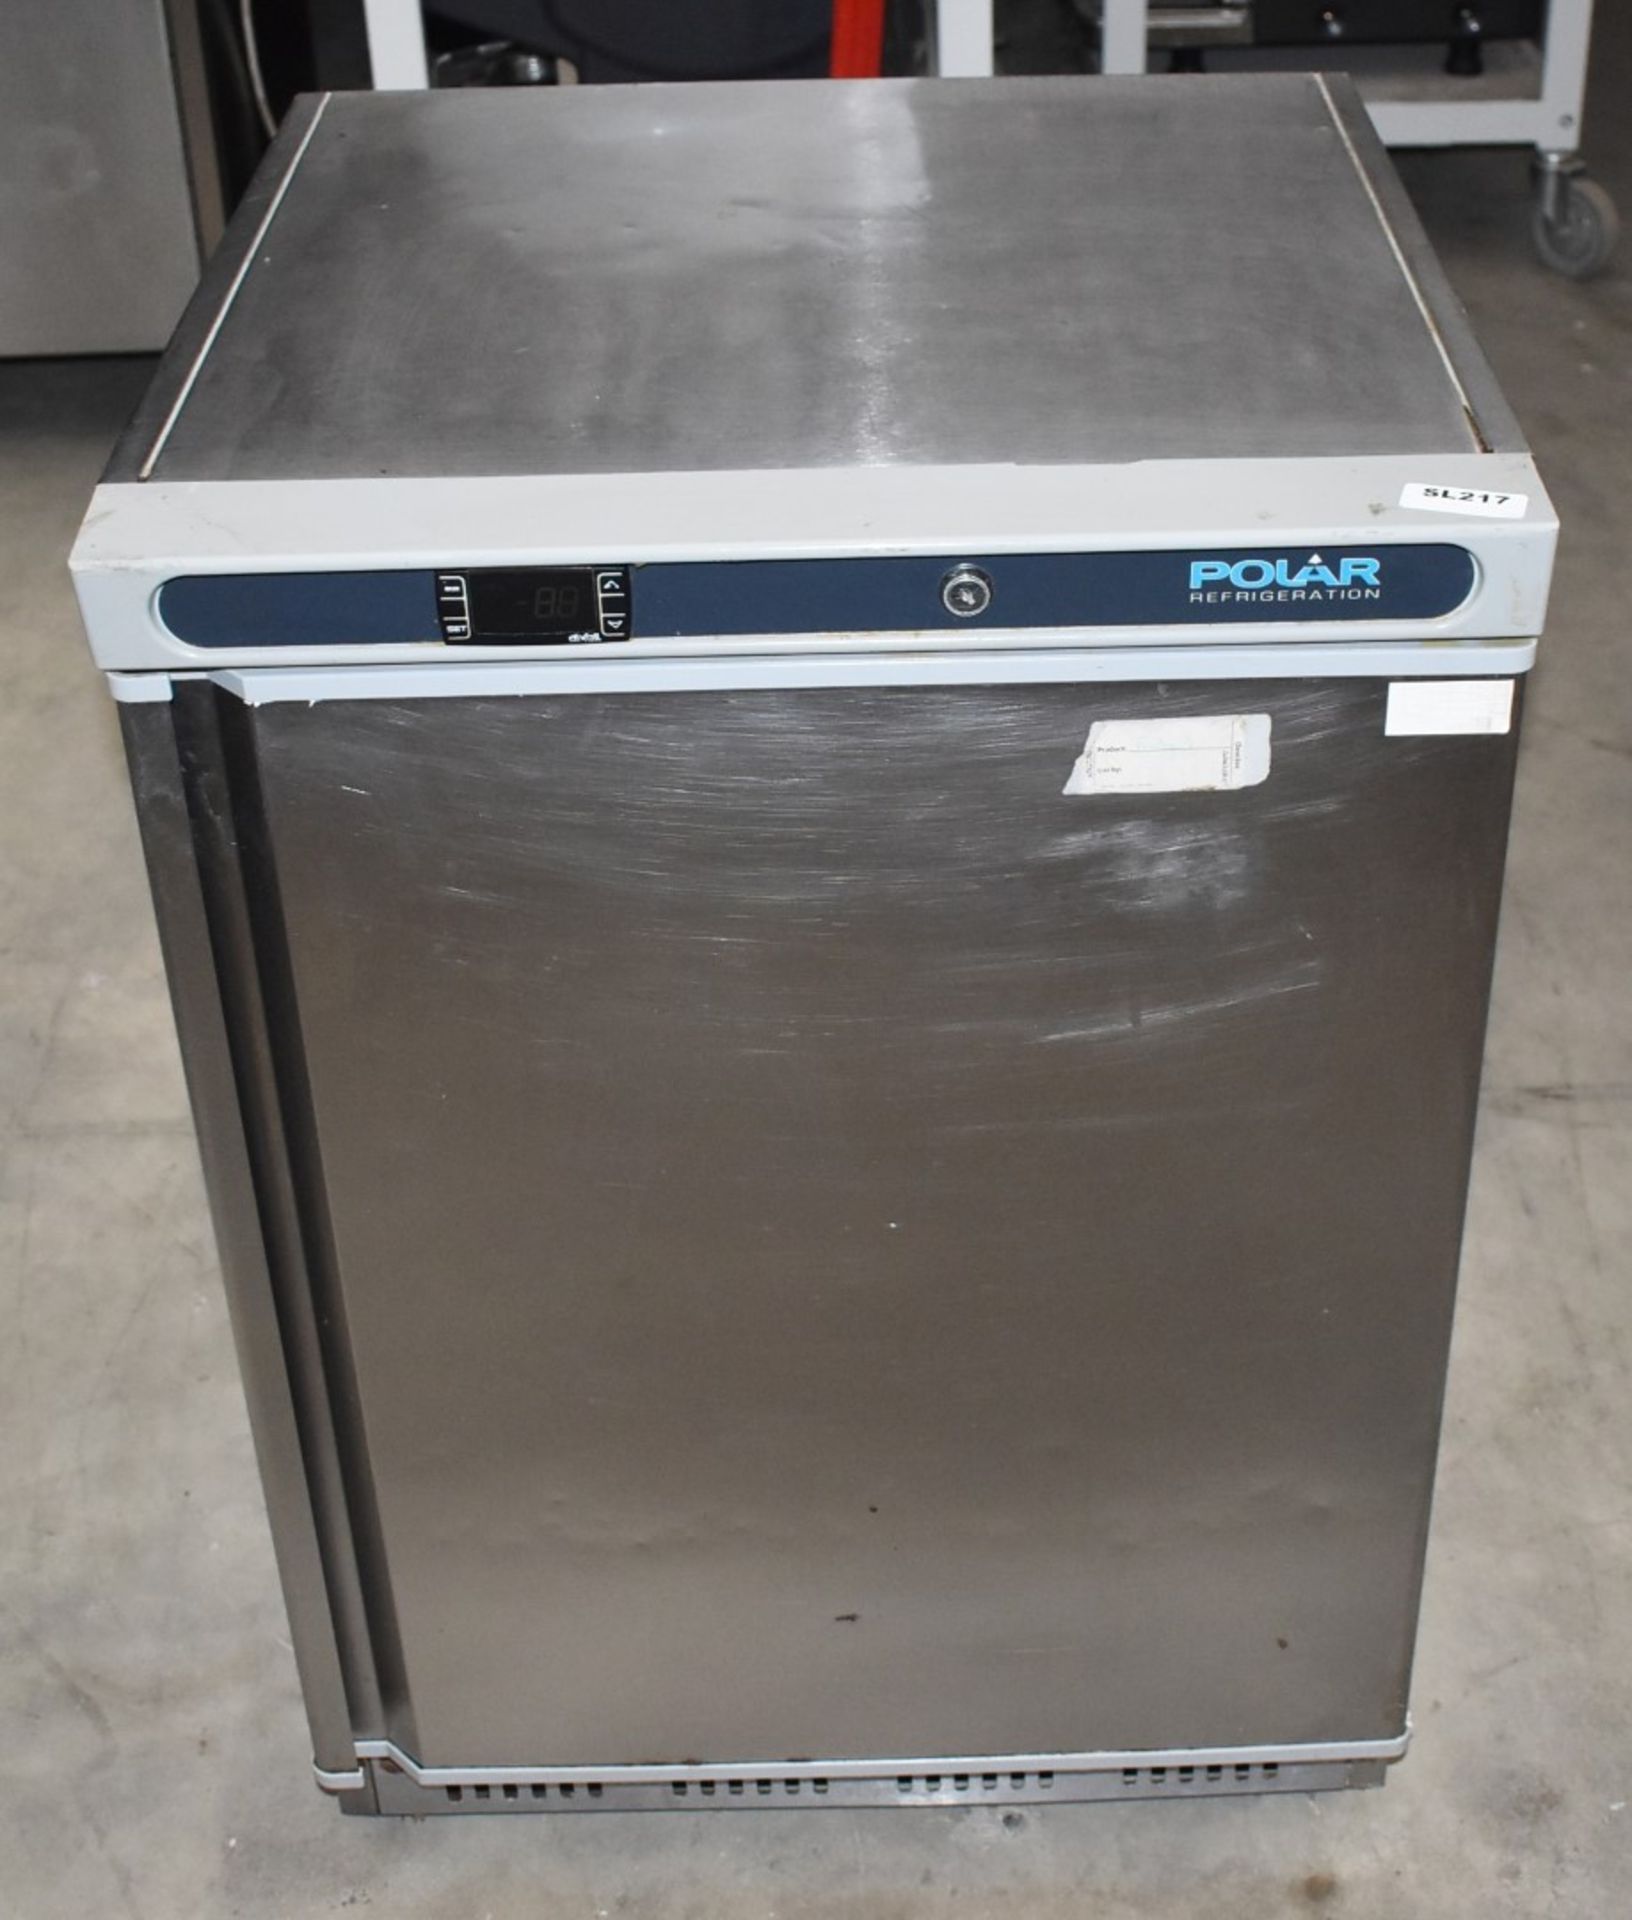 1 x Polar CD080 Undercounter Stainless Steel Fridge - Recently Removed From a Restaurant Environment